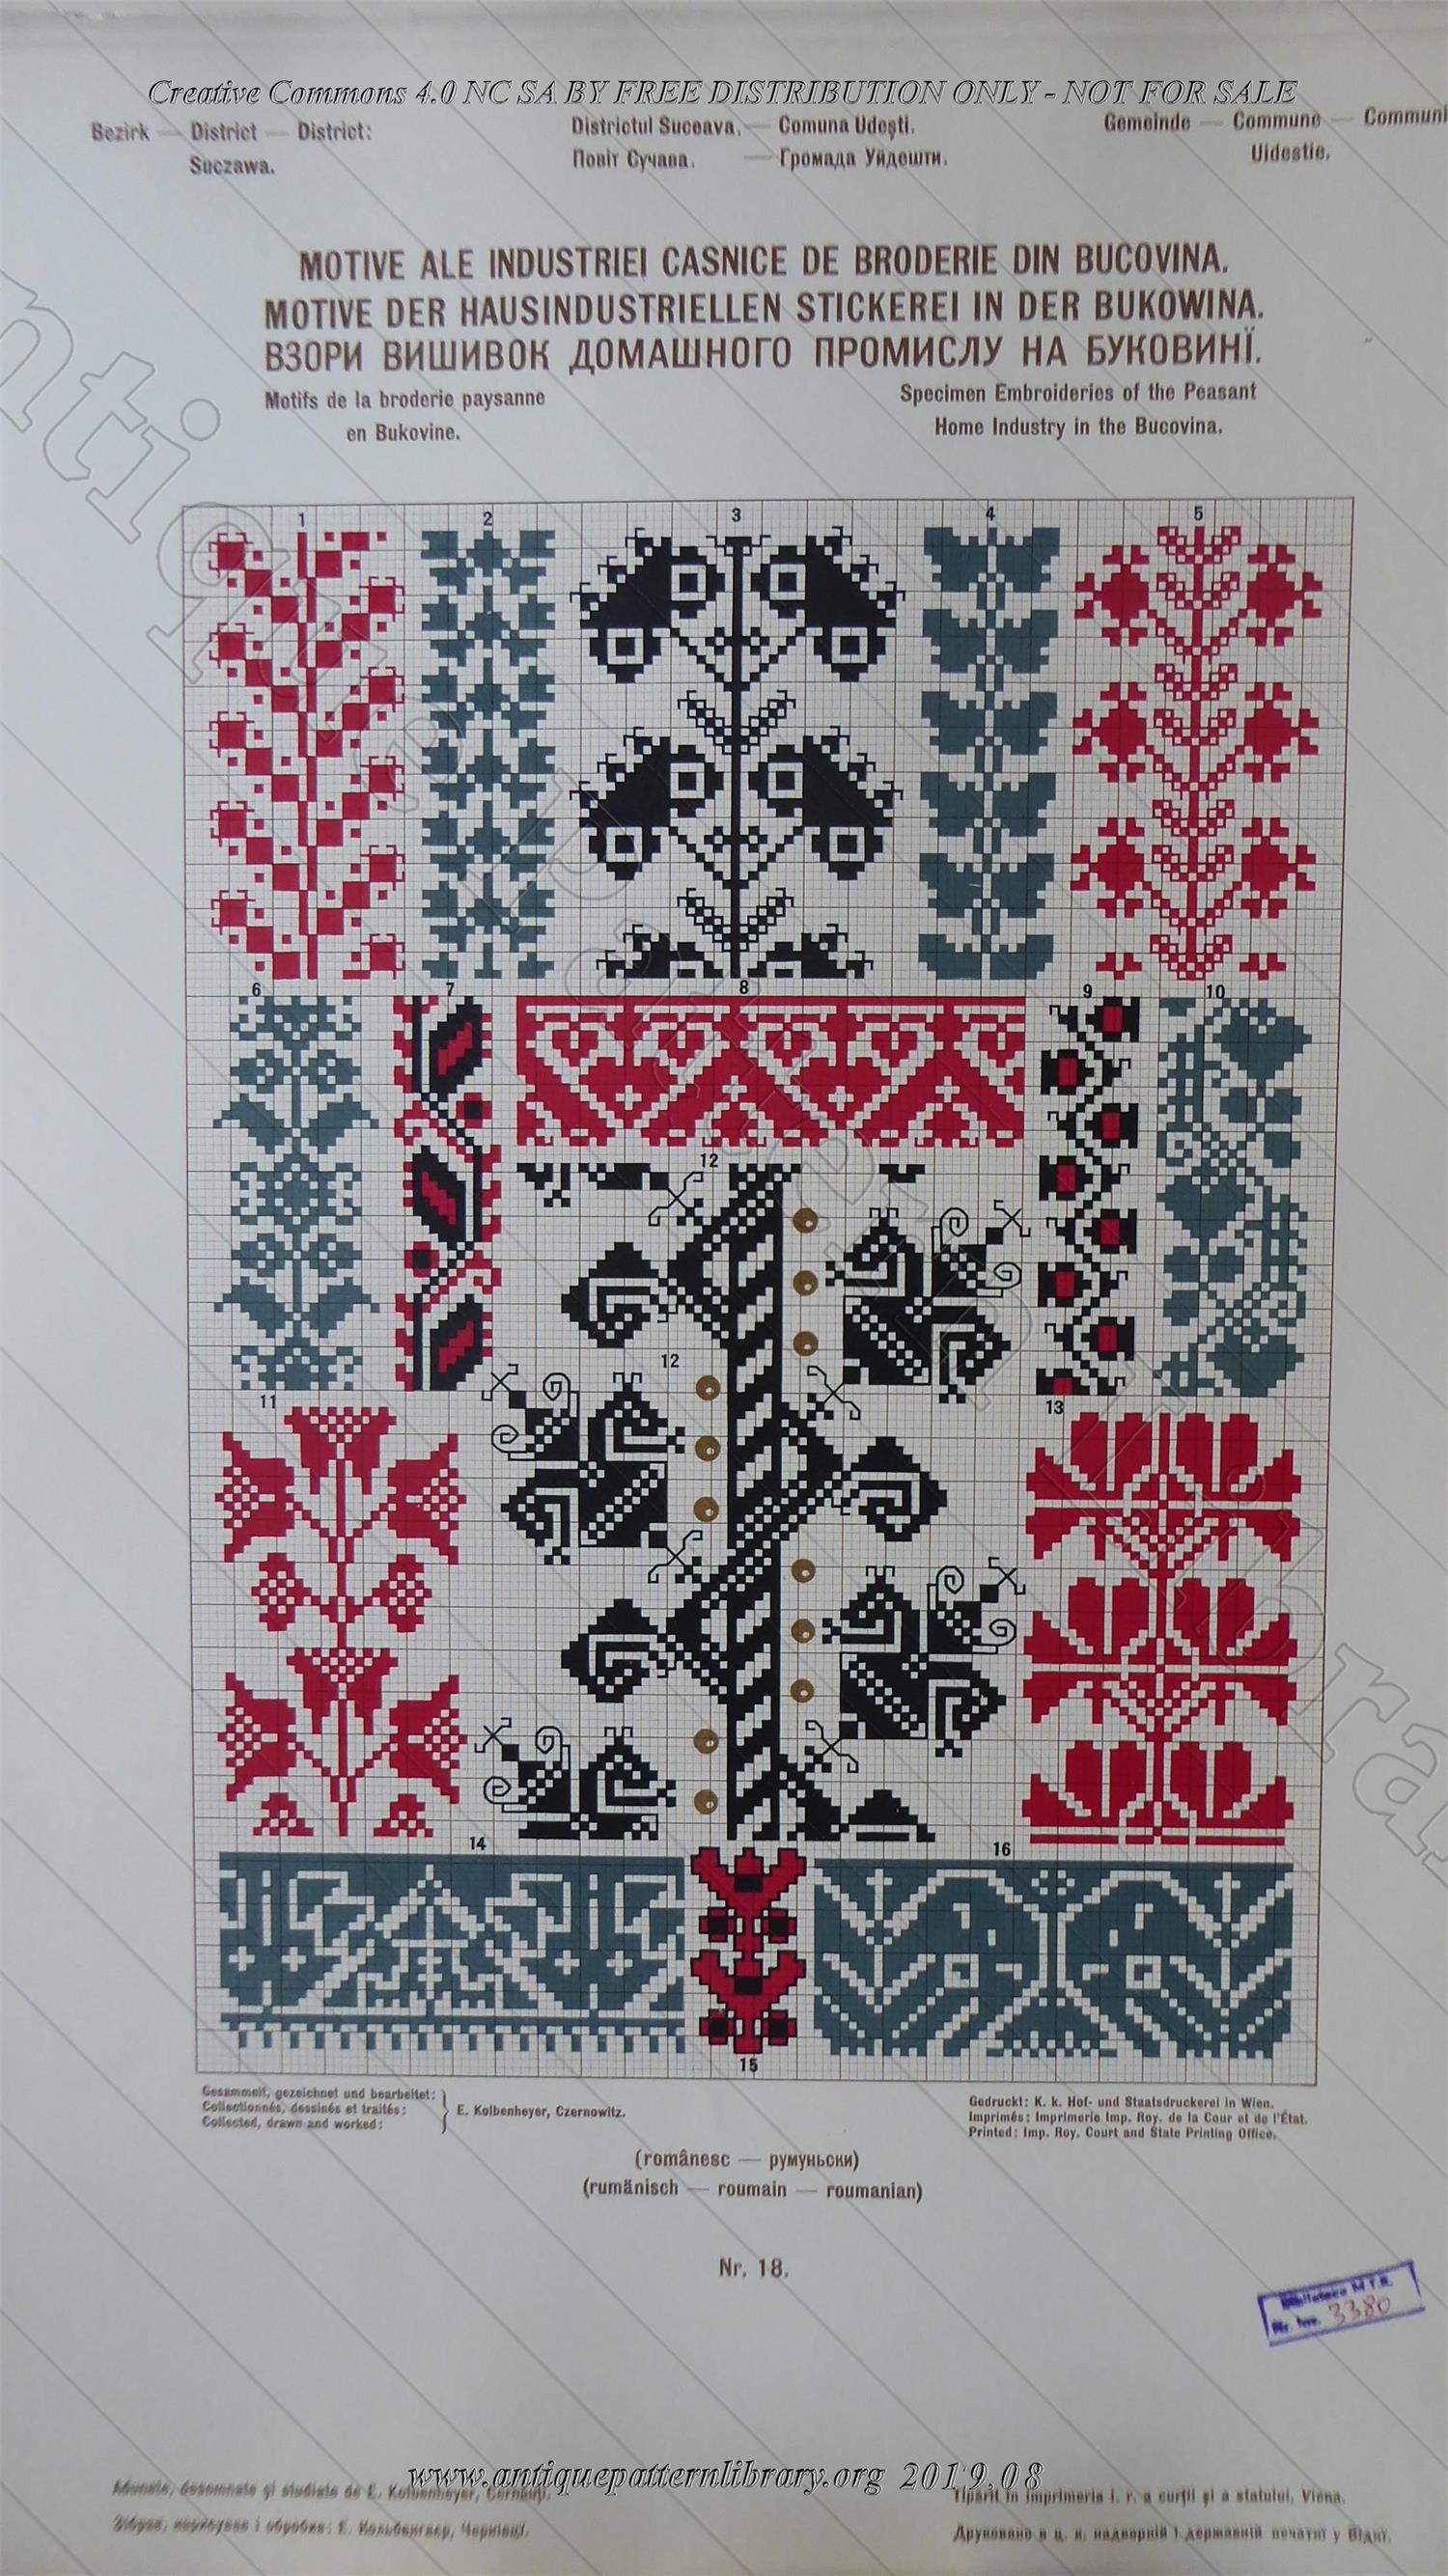 H-IB003 Specimen Embroideries of the Peasant Home Industrie in the Bukovina